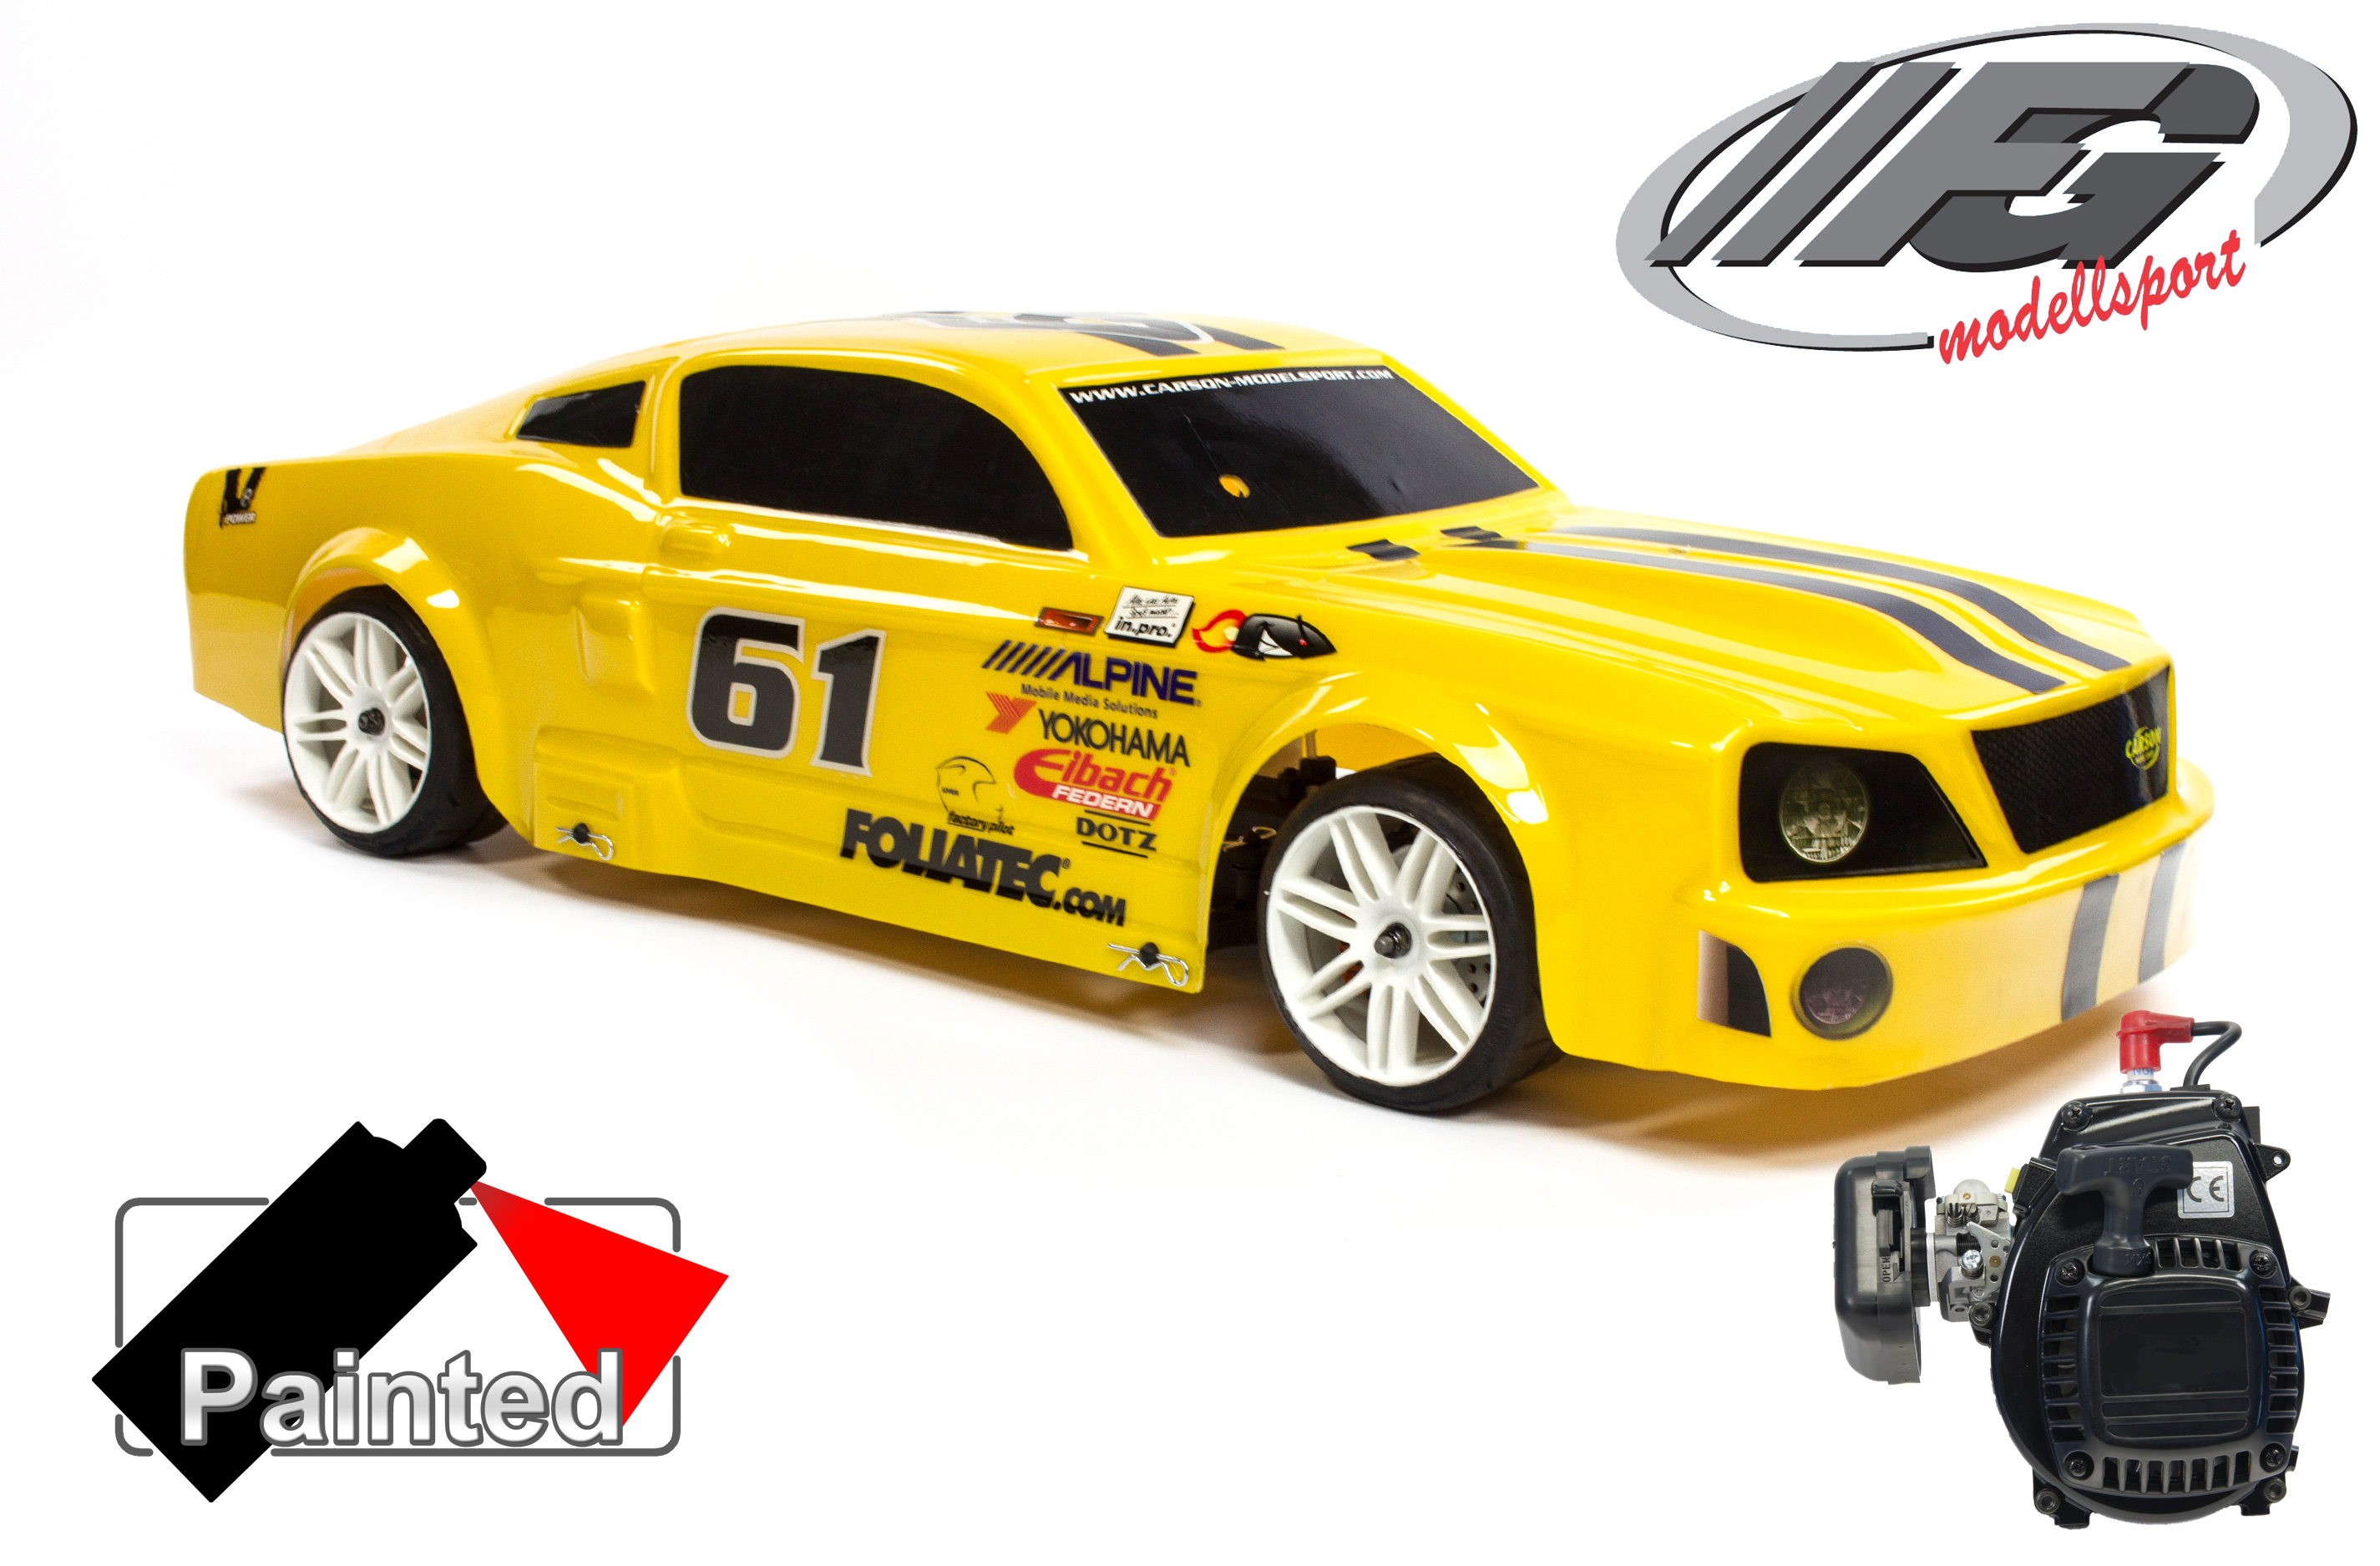 FG Sportsline with painted Ford Mustang body shell, 23cm³ Engine